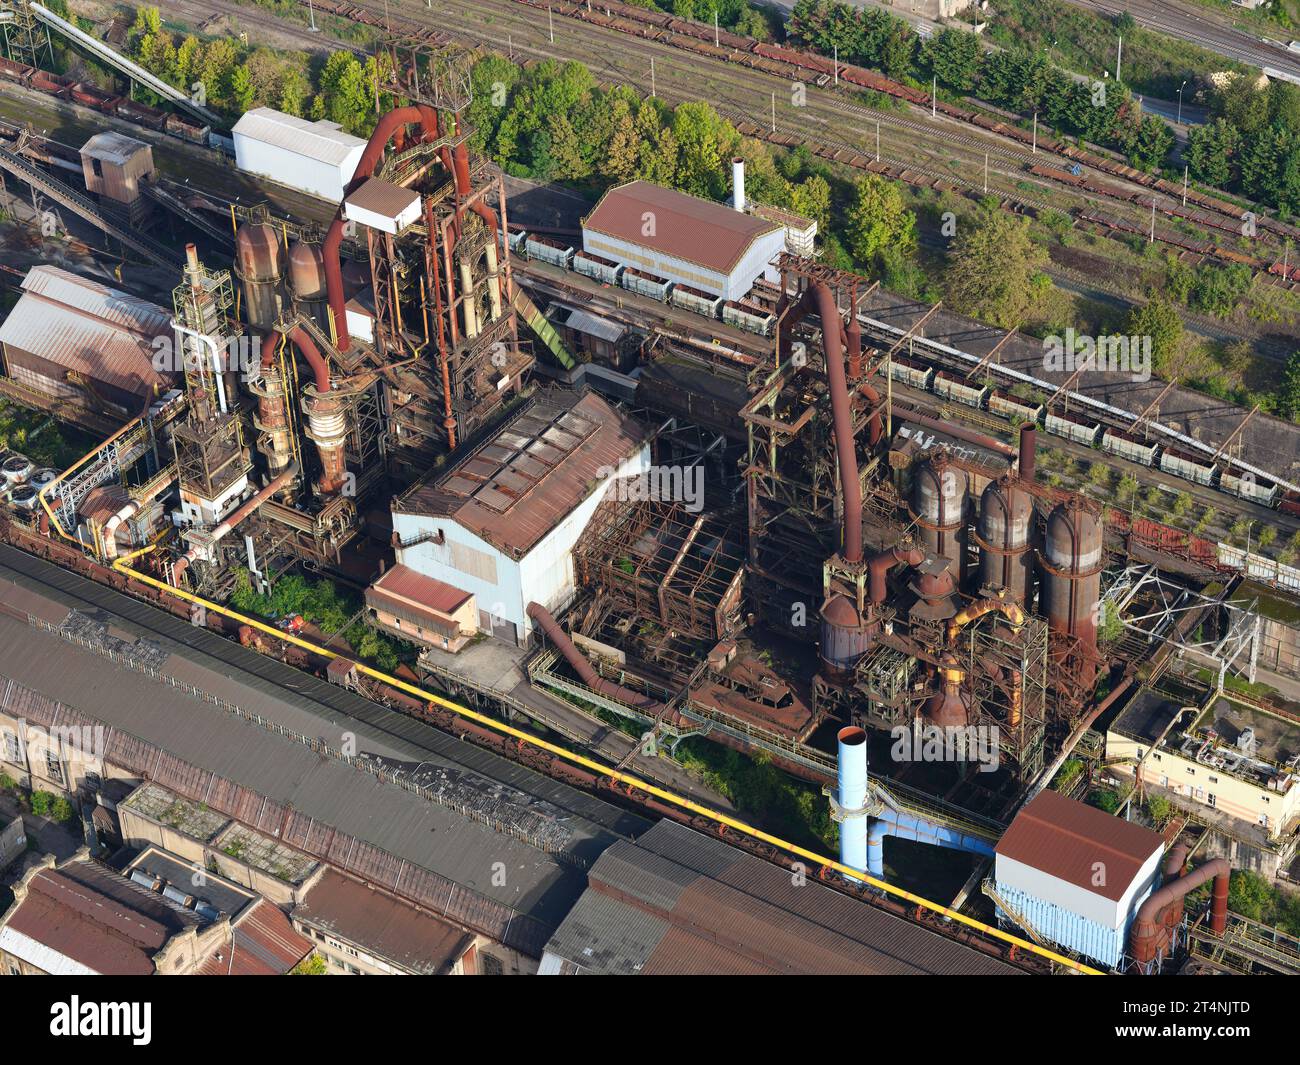 AERIAL VIEW. The blast furnaces at the abandoned steel mills of Hayange. Moselle, Lorraine, Grand Est, France. Stock Photo